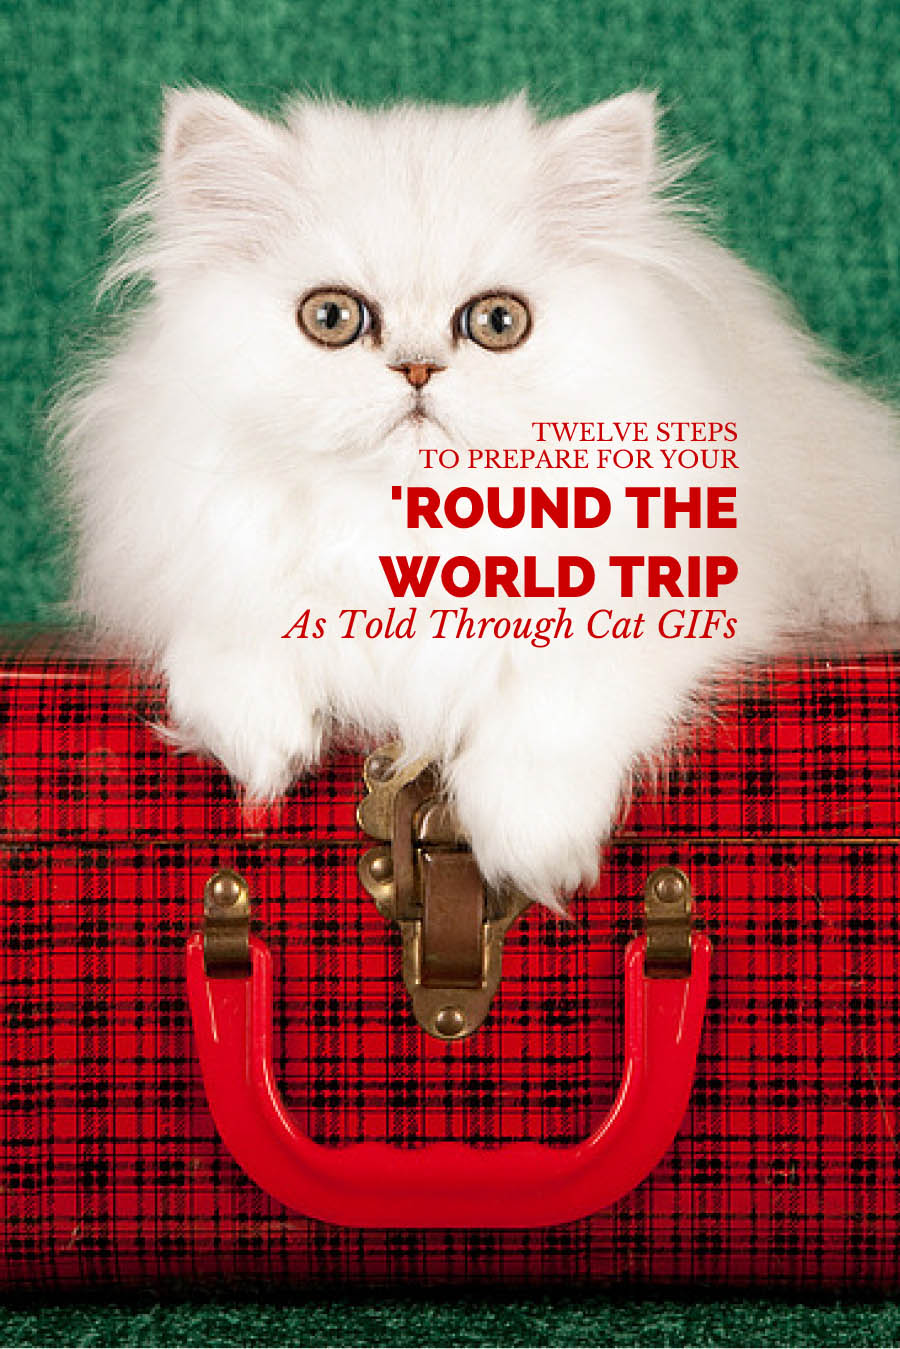 Twelve Steps to Prepare for Your 'Round the World Trip, As Told Through Cat GIFs